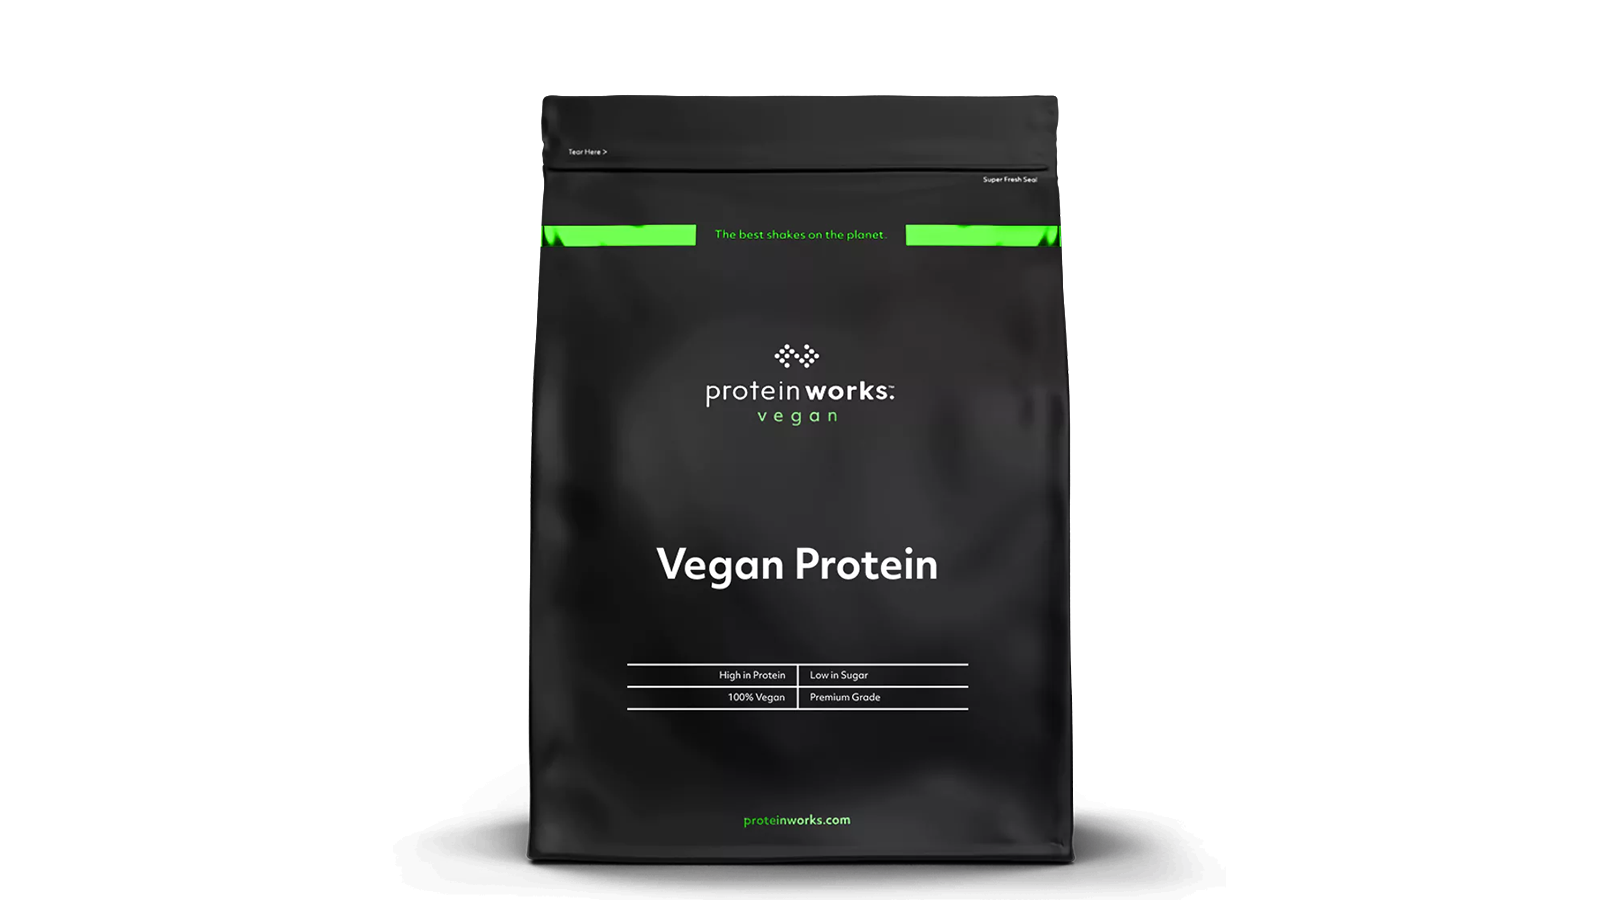 3. The Protein Works